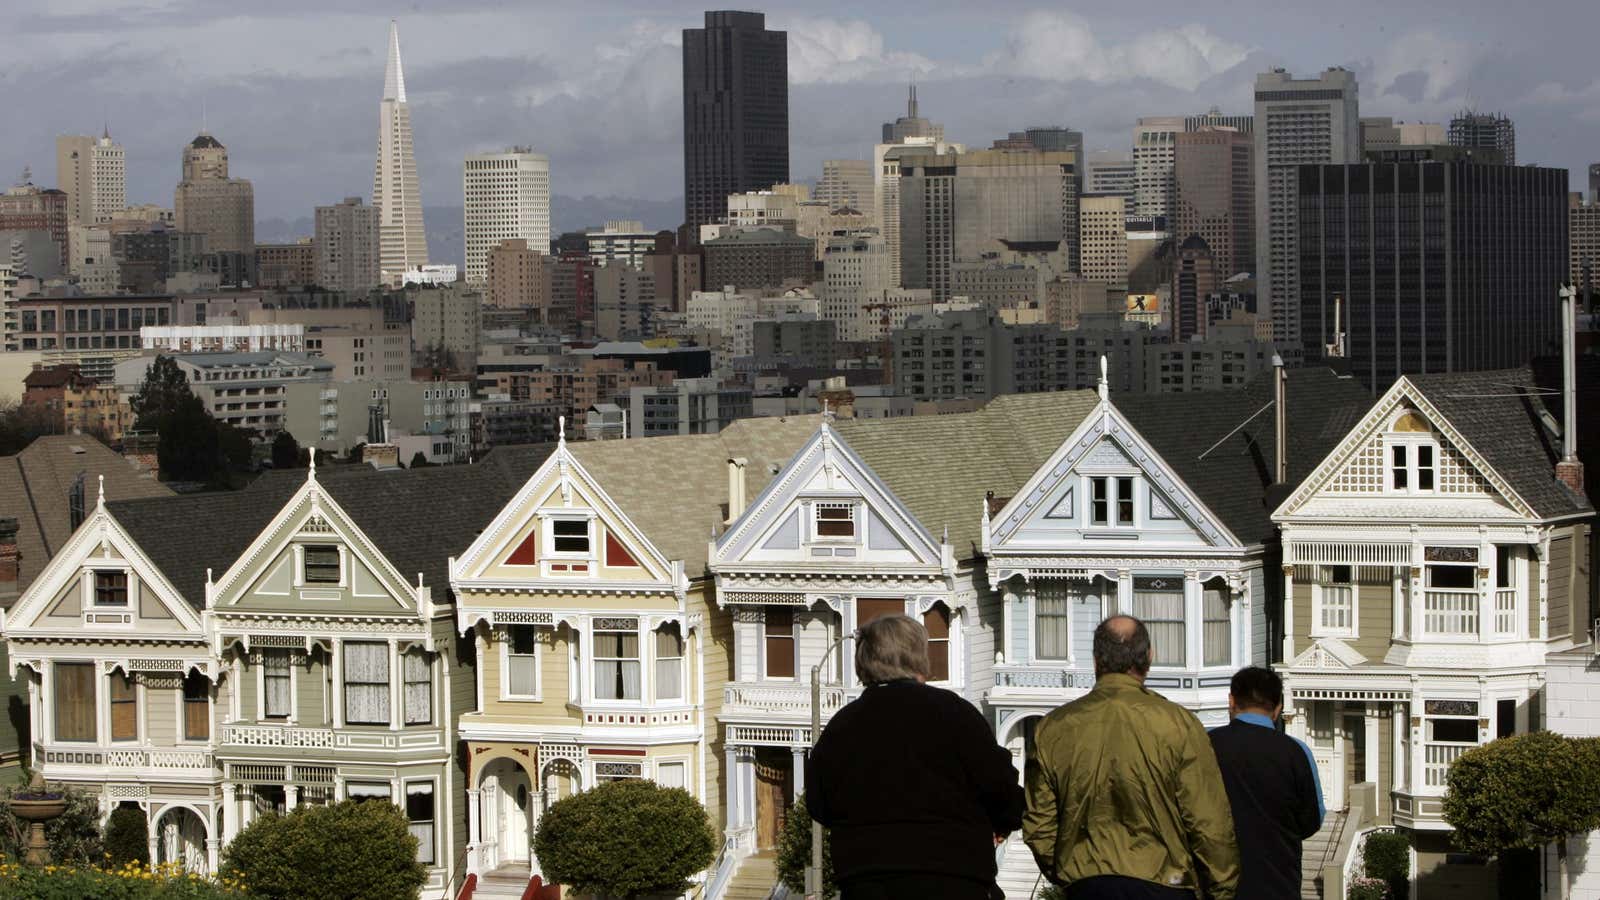 San Francisco may soon tax homes that stay empty for too long.